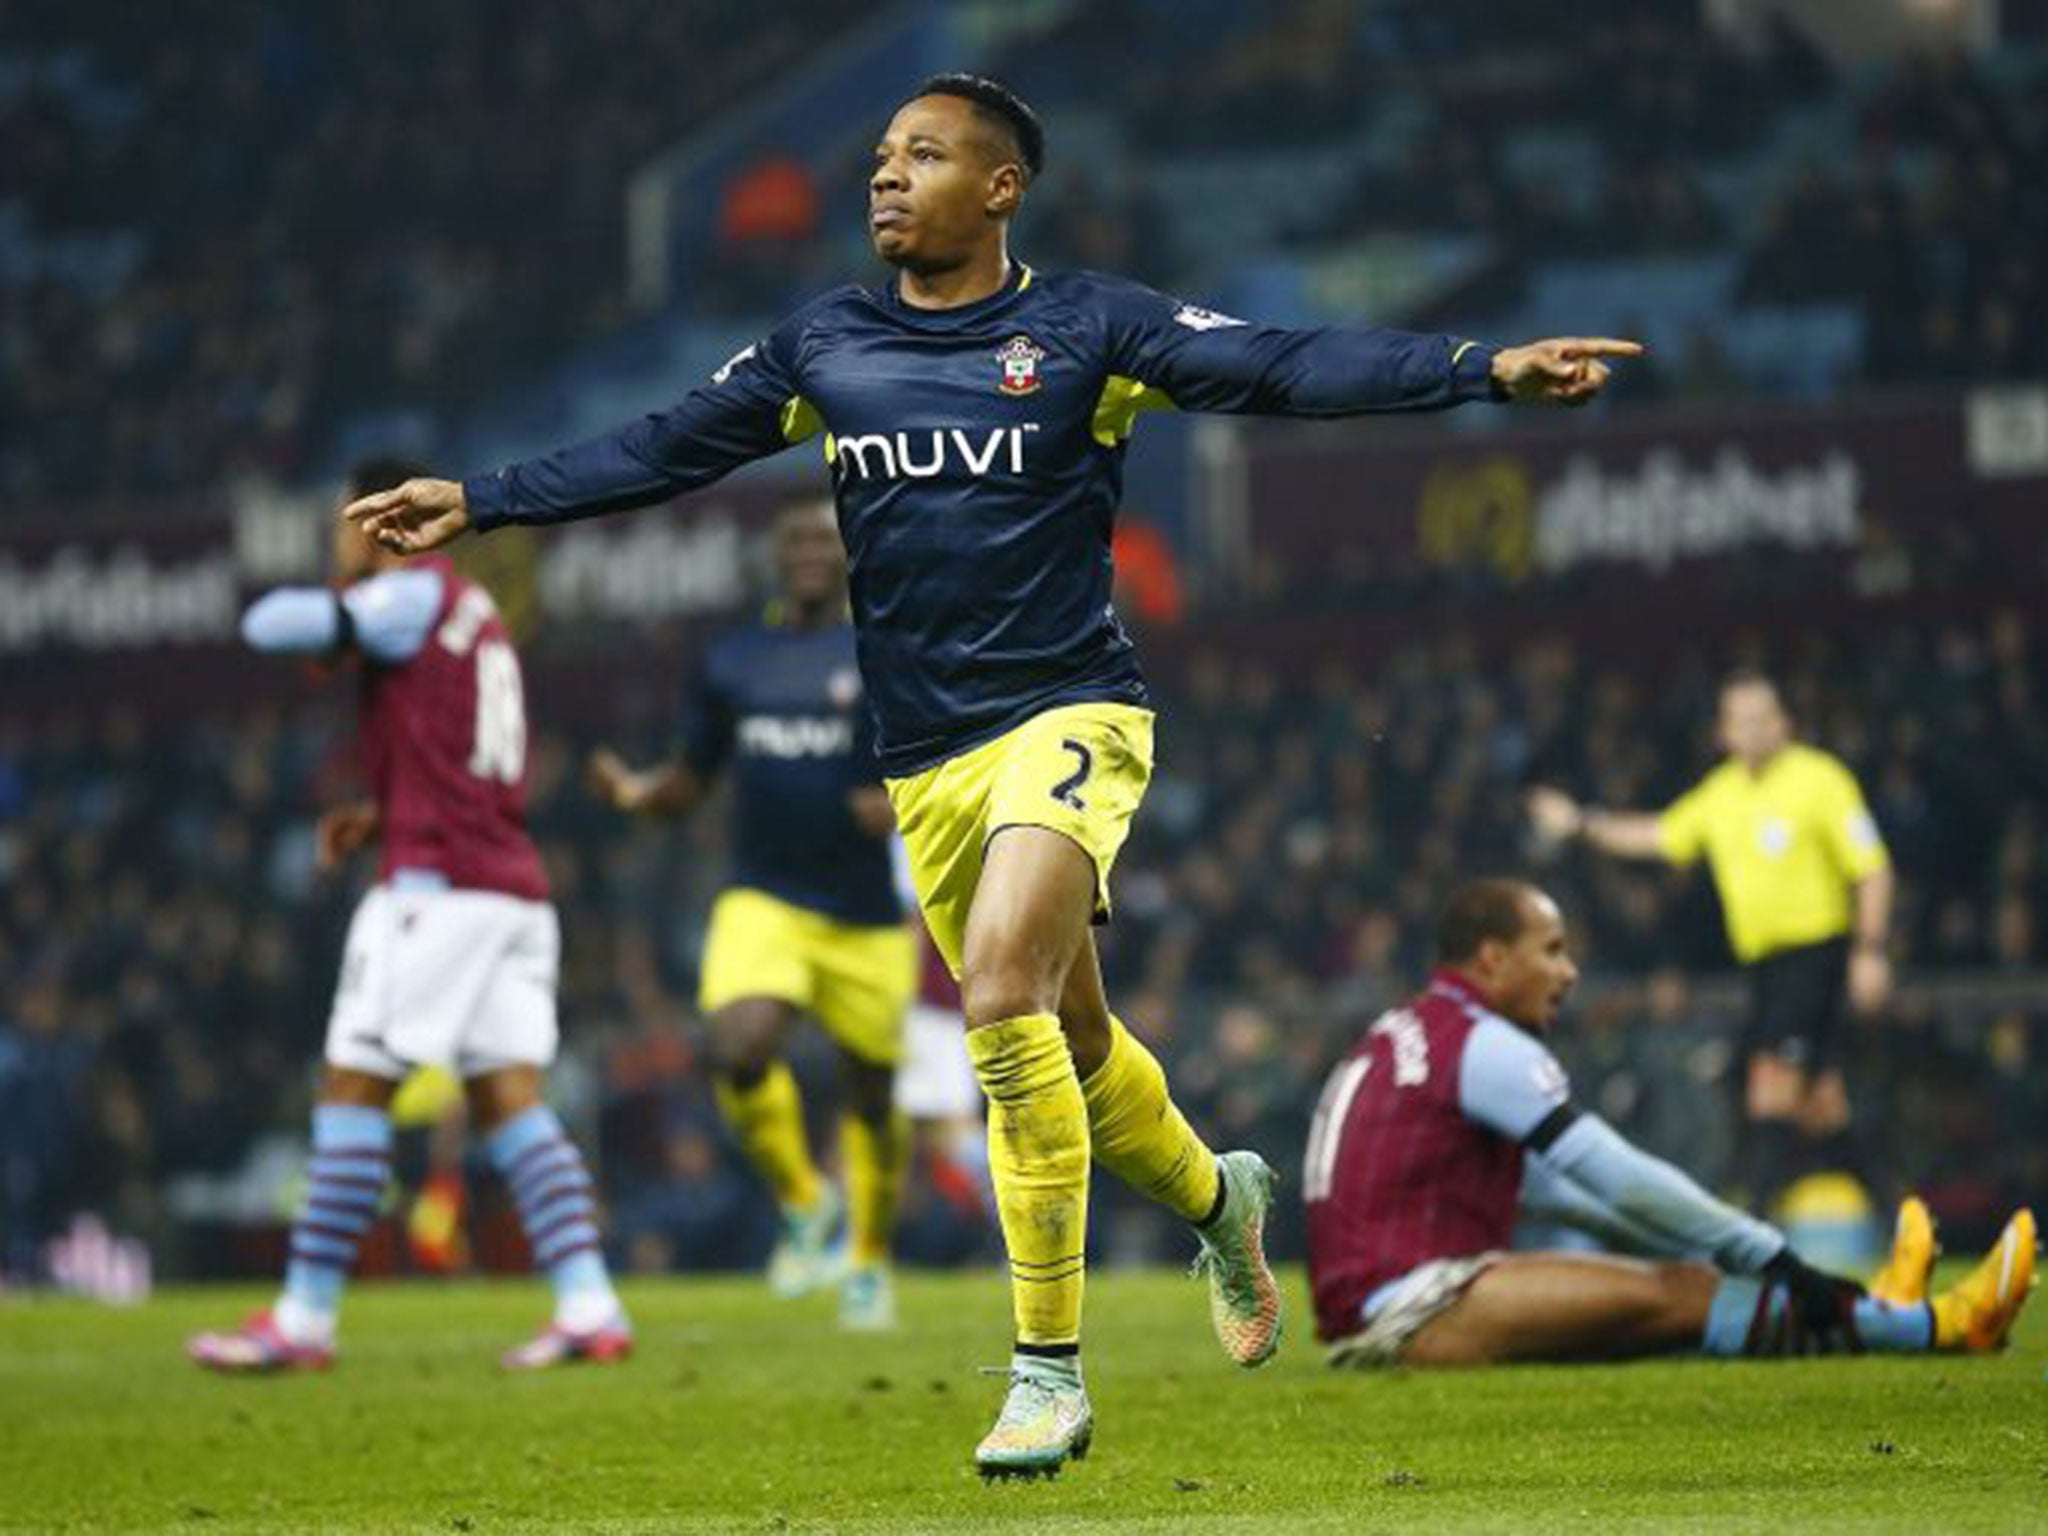 Nathaniel Clyne celebrates after salvaging a point with the Southampton equaliser